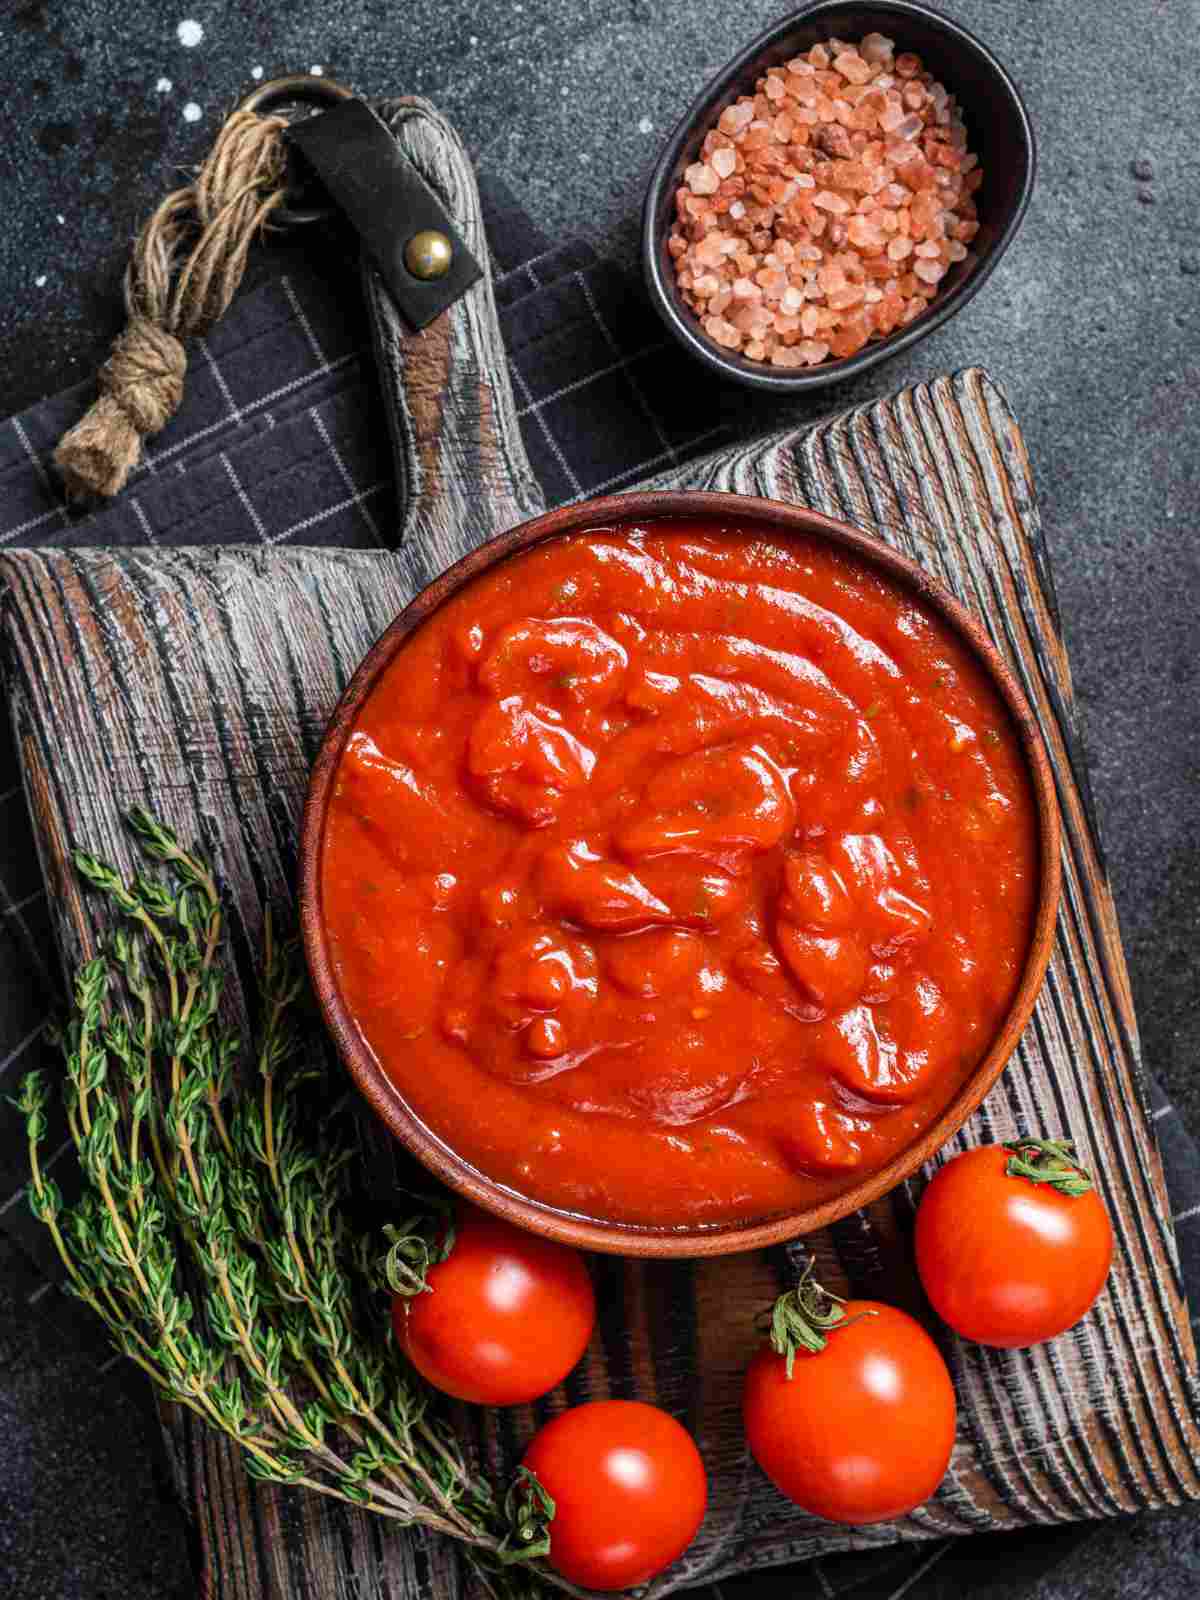 Global variations of tomato-based sauces and pastes